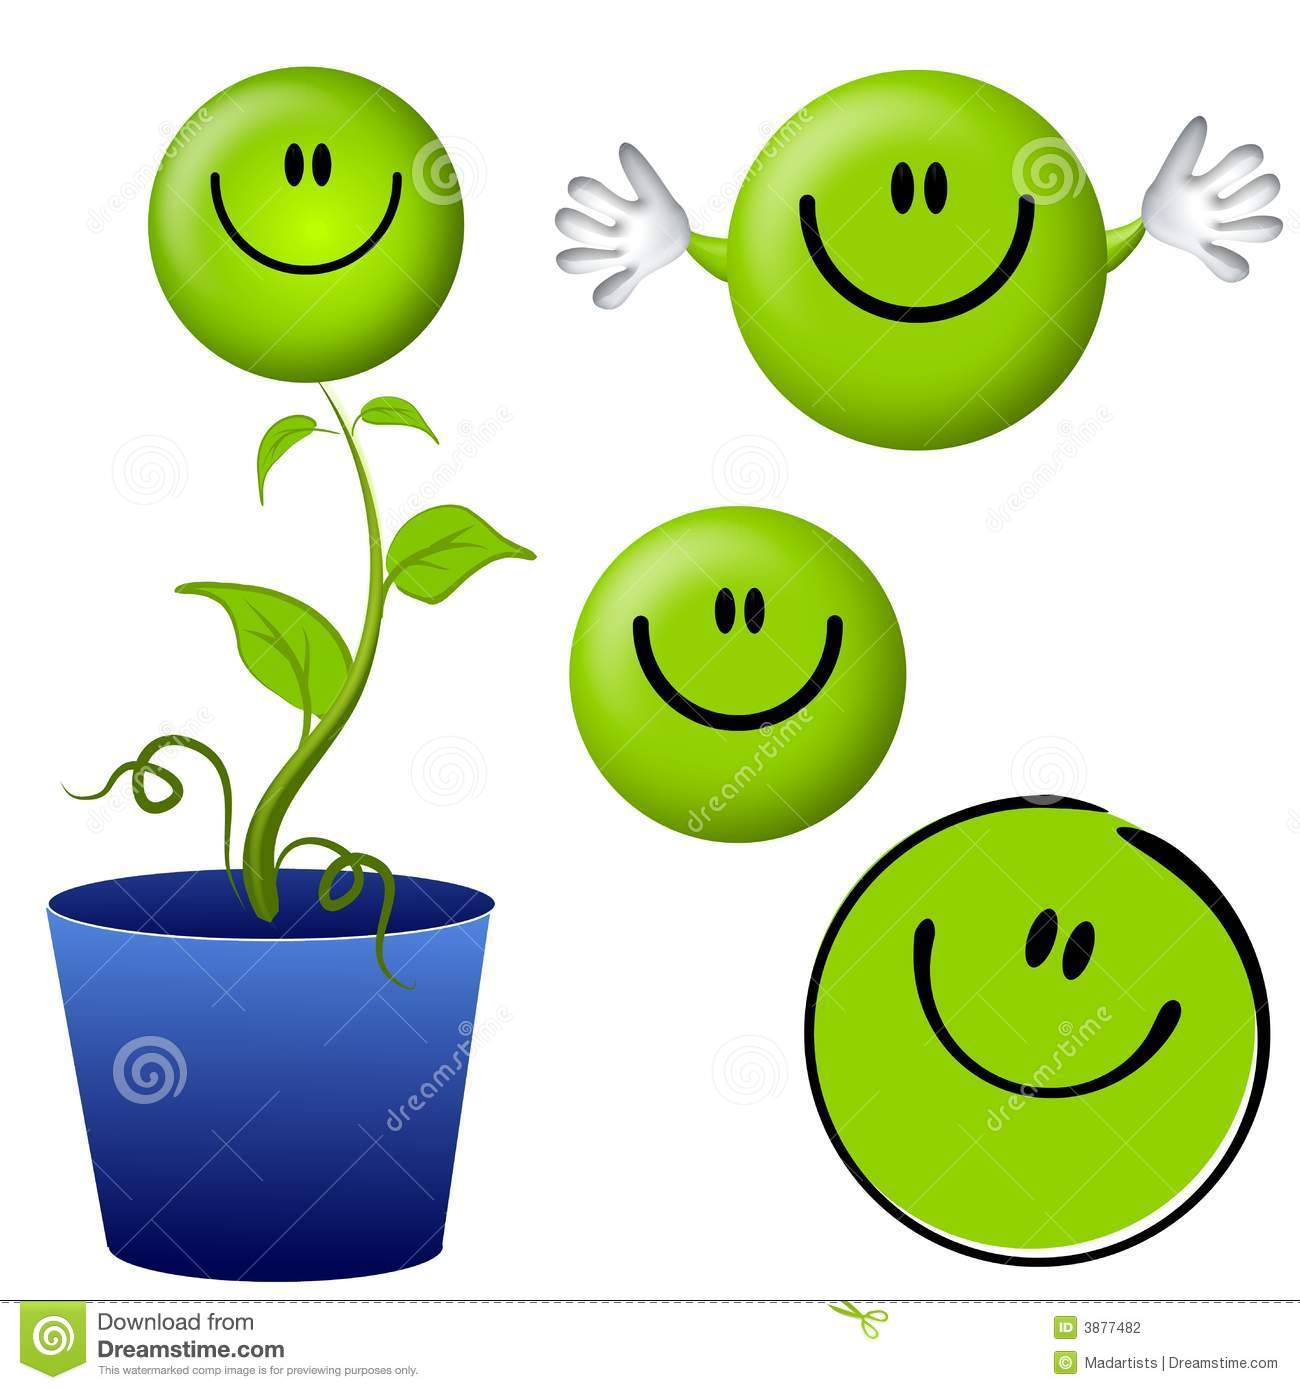 Clip Art Illustration Featuring A Variety Of Green Themed Smiley